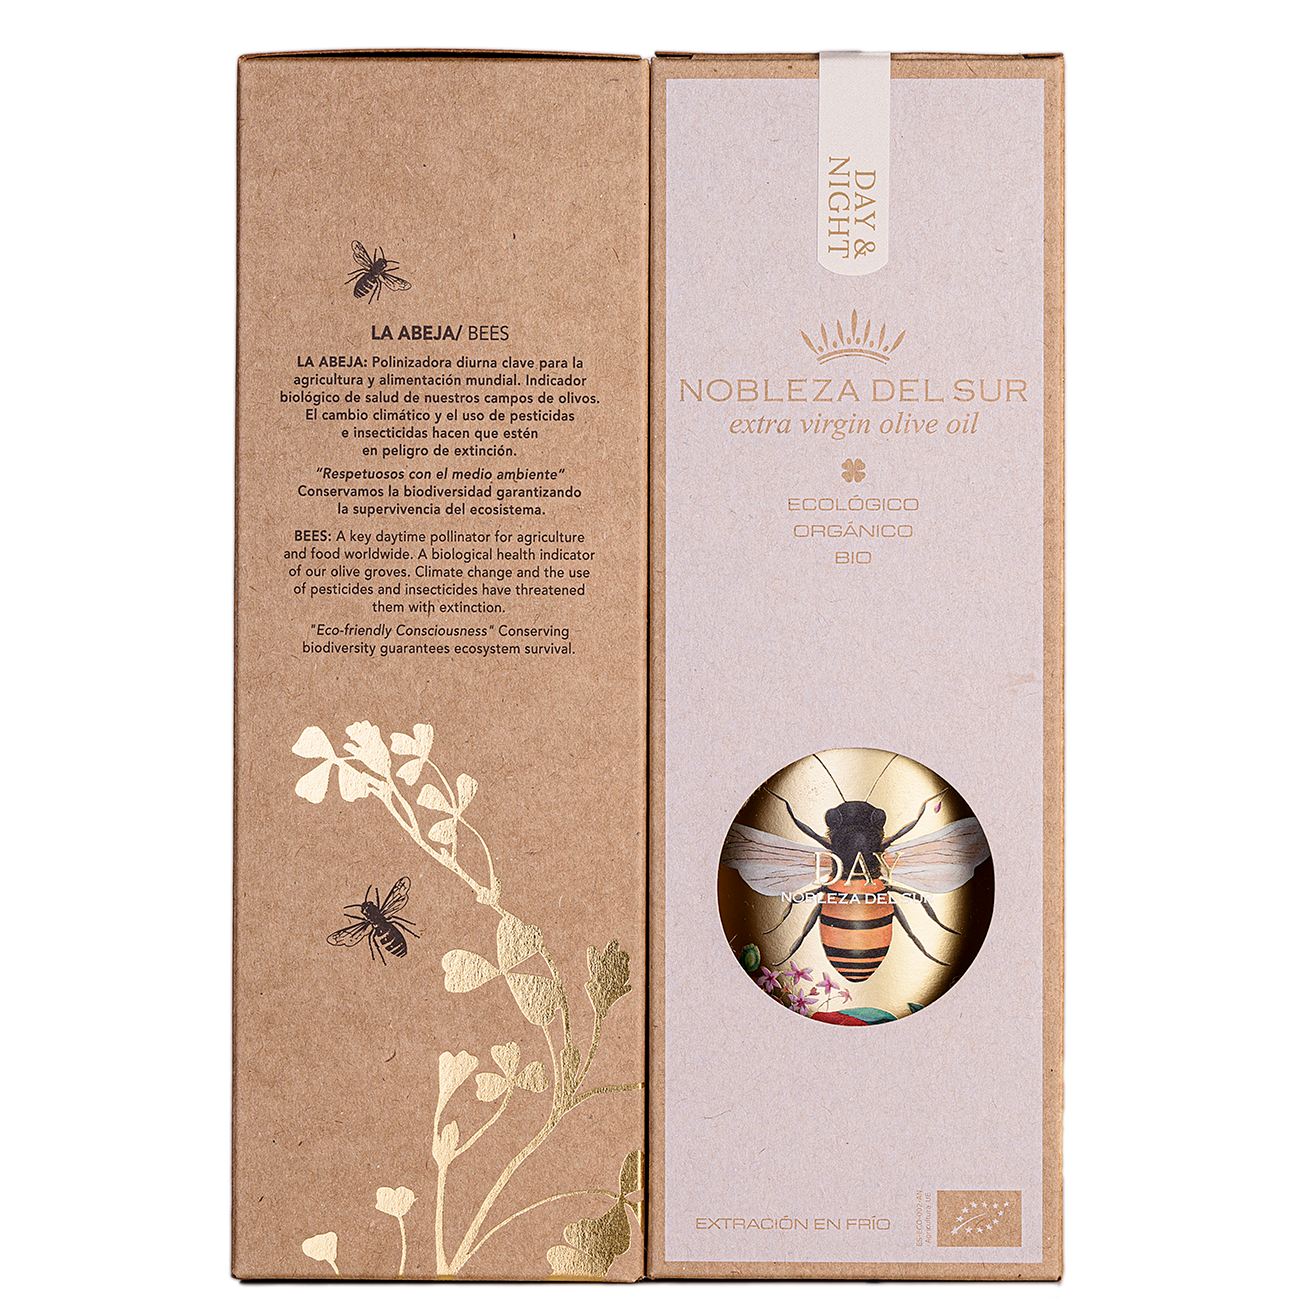 Nobleza del Sur Early Harvest "Day" Picual Organic  Extra Virgin Olive Oil 500ml in Gift Box